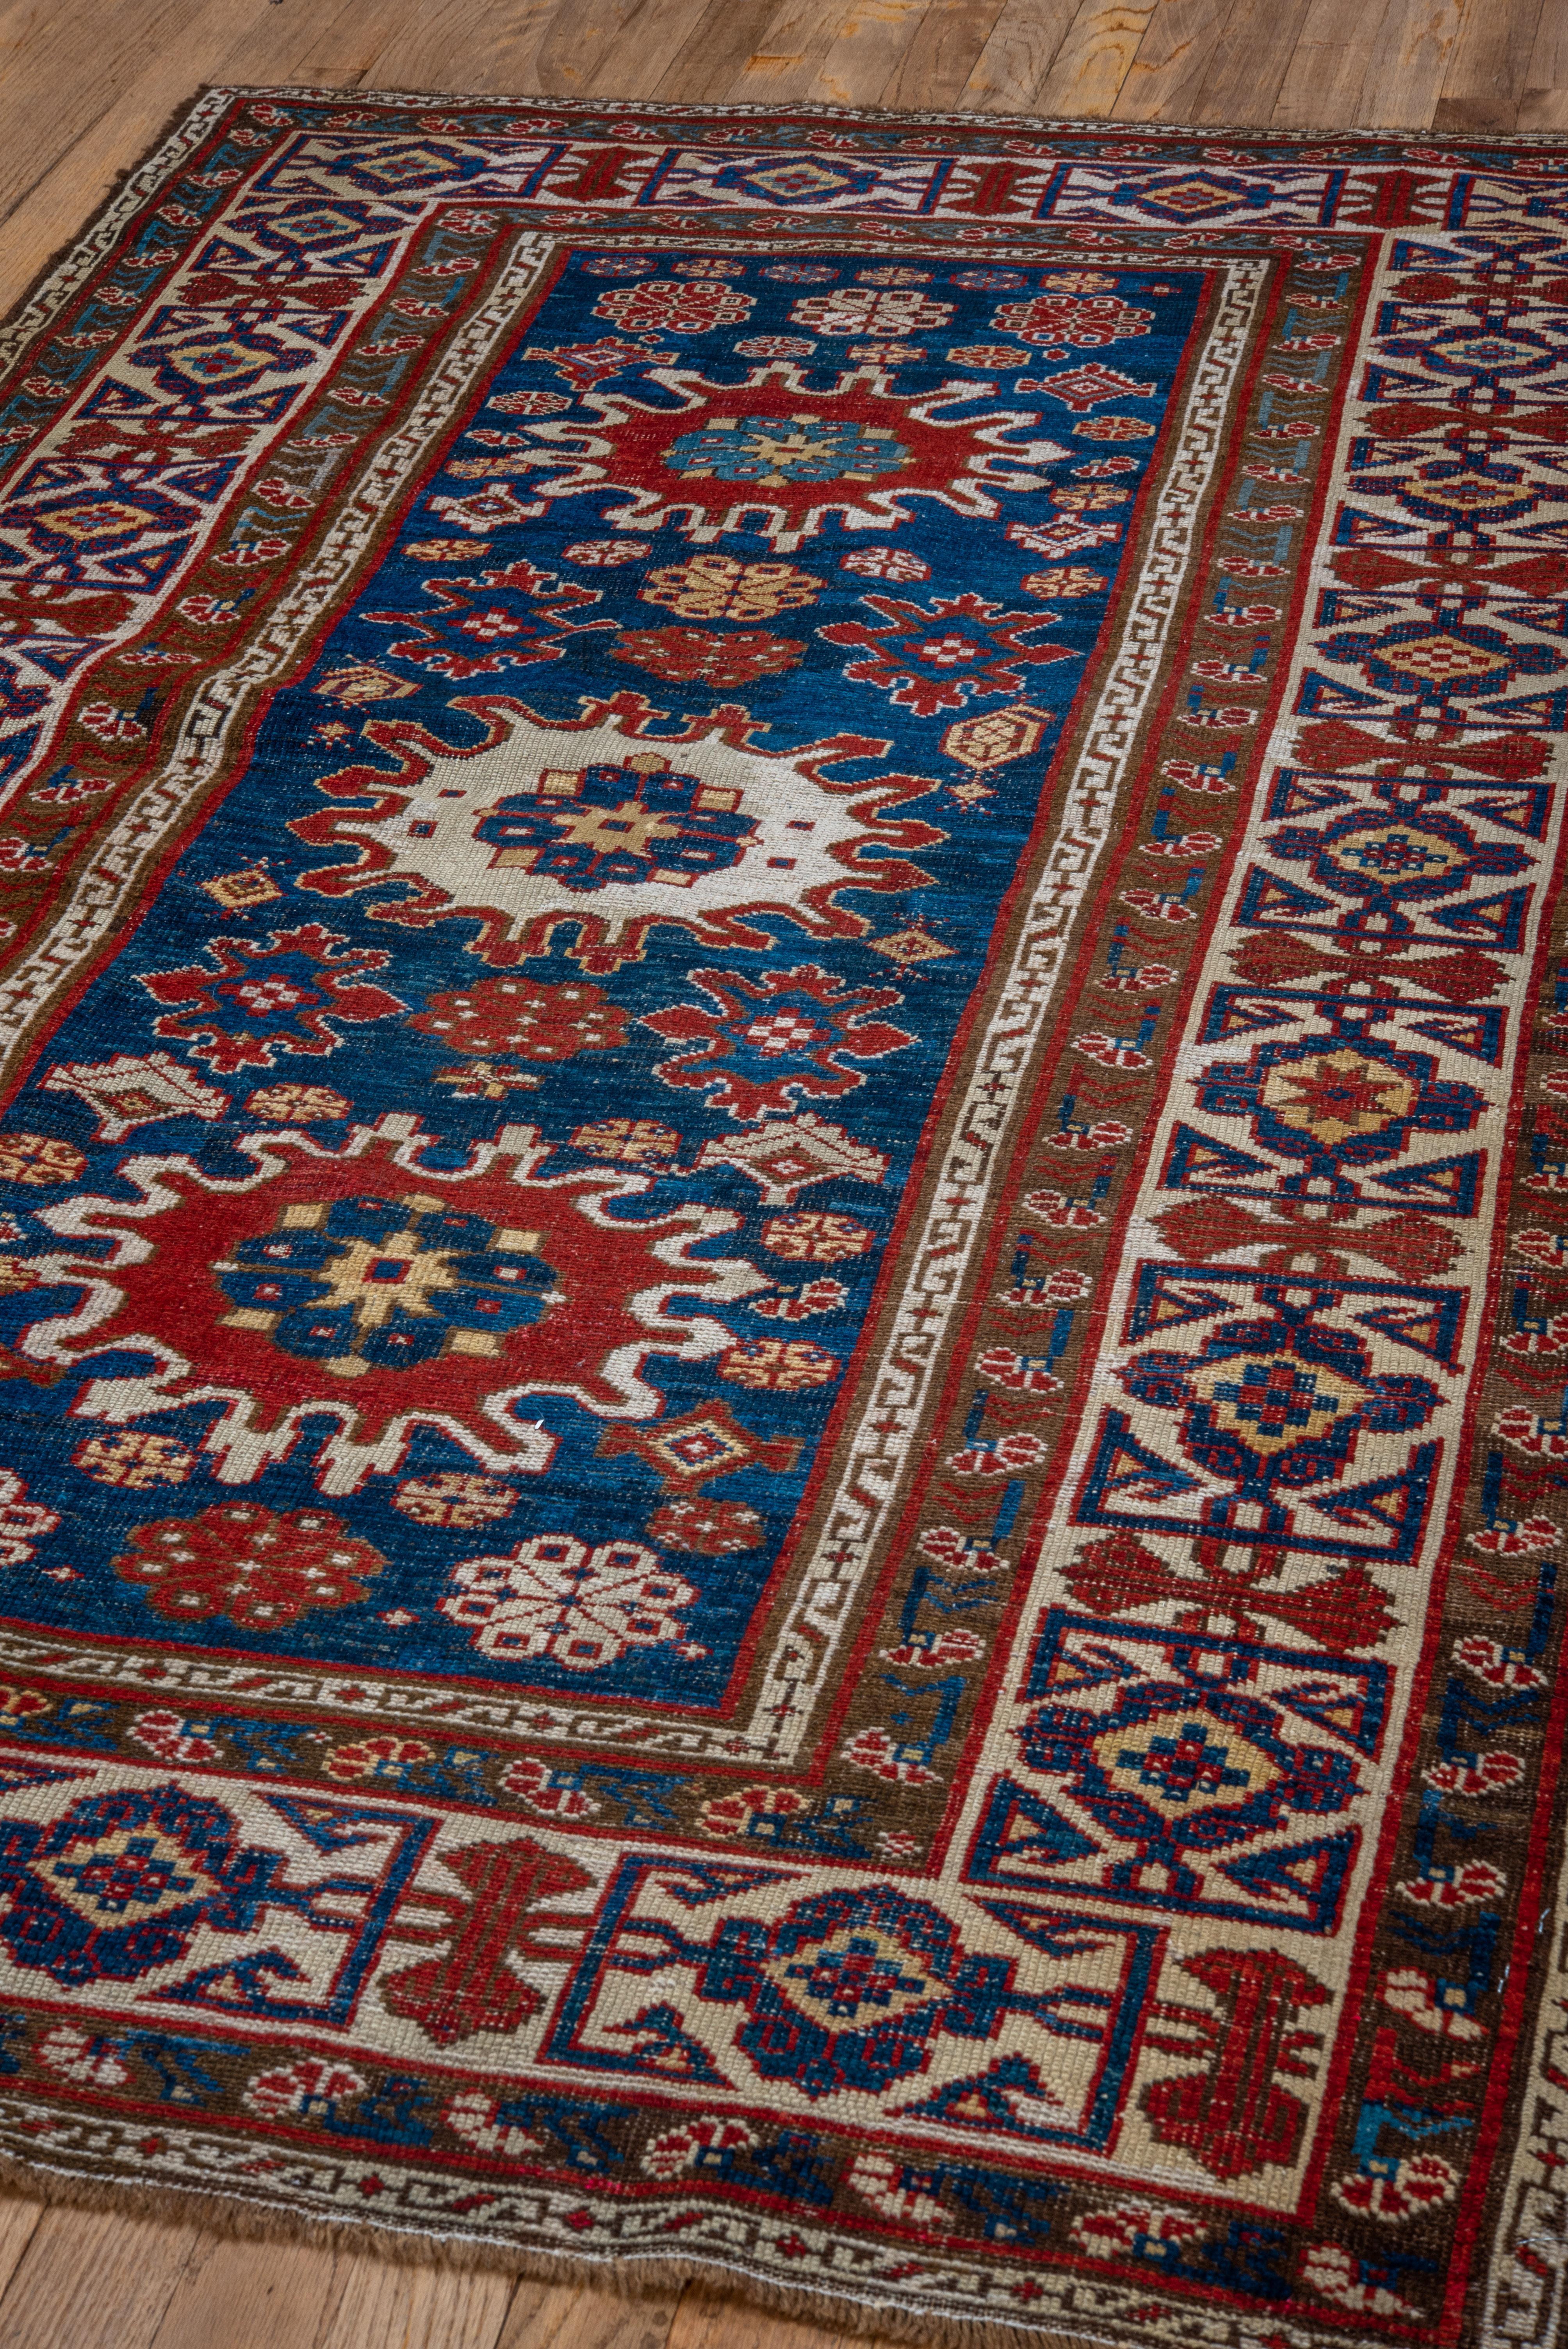 Early 20th Century Fine Antique Caucasian Shirvan Rug, Royal Blue Field & Red Borders, circa 1910s For Sale